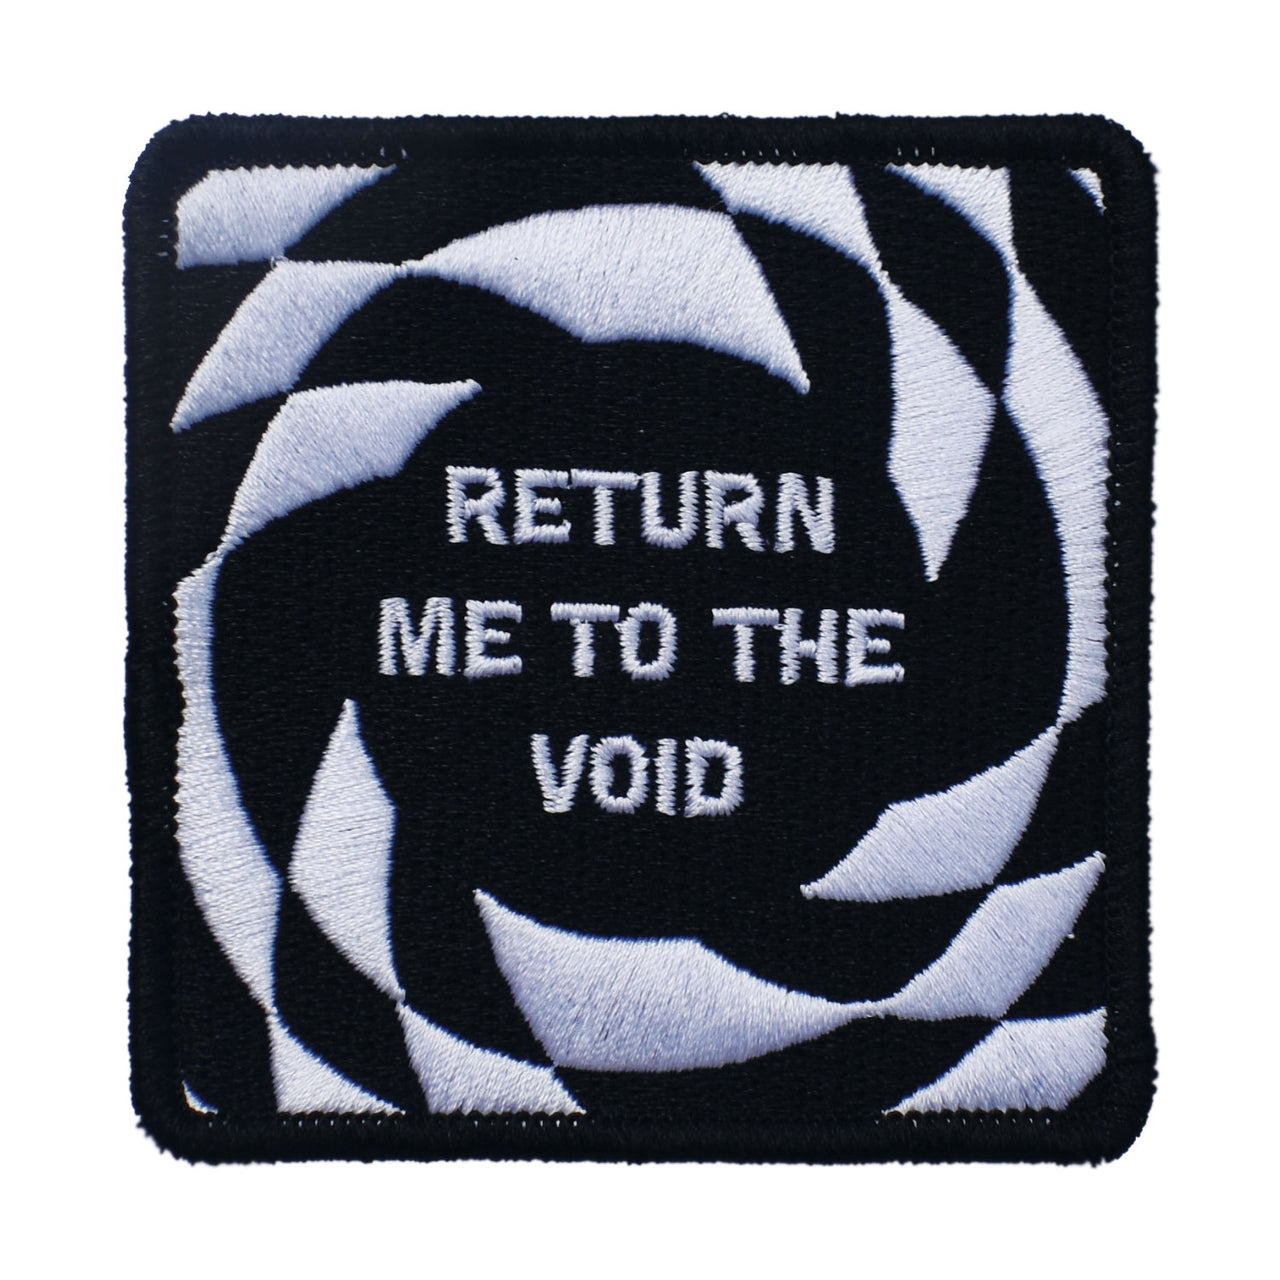 Return Me to the Void (Iron-On Patch)